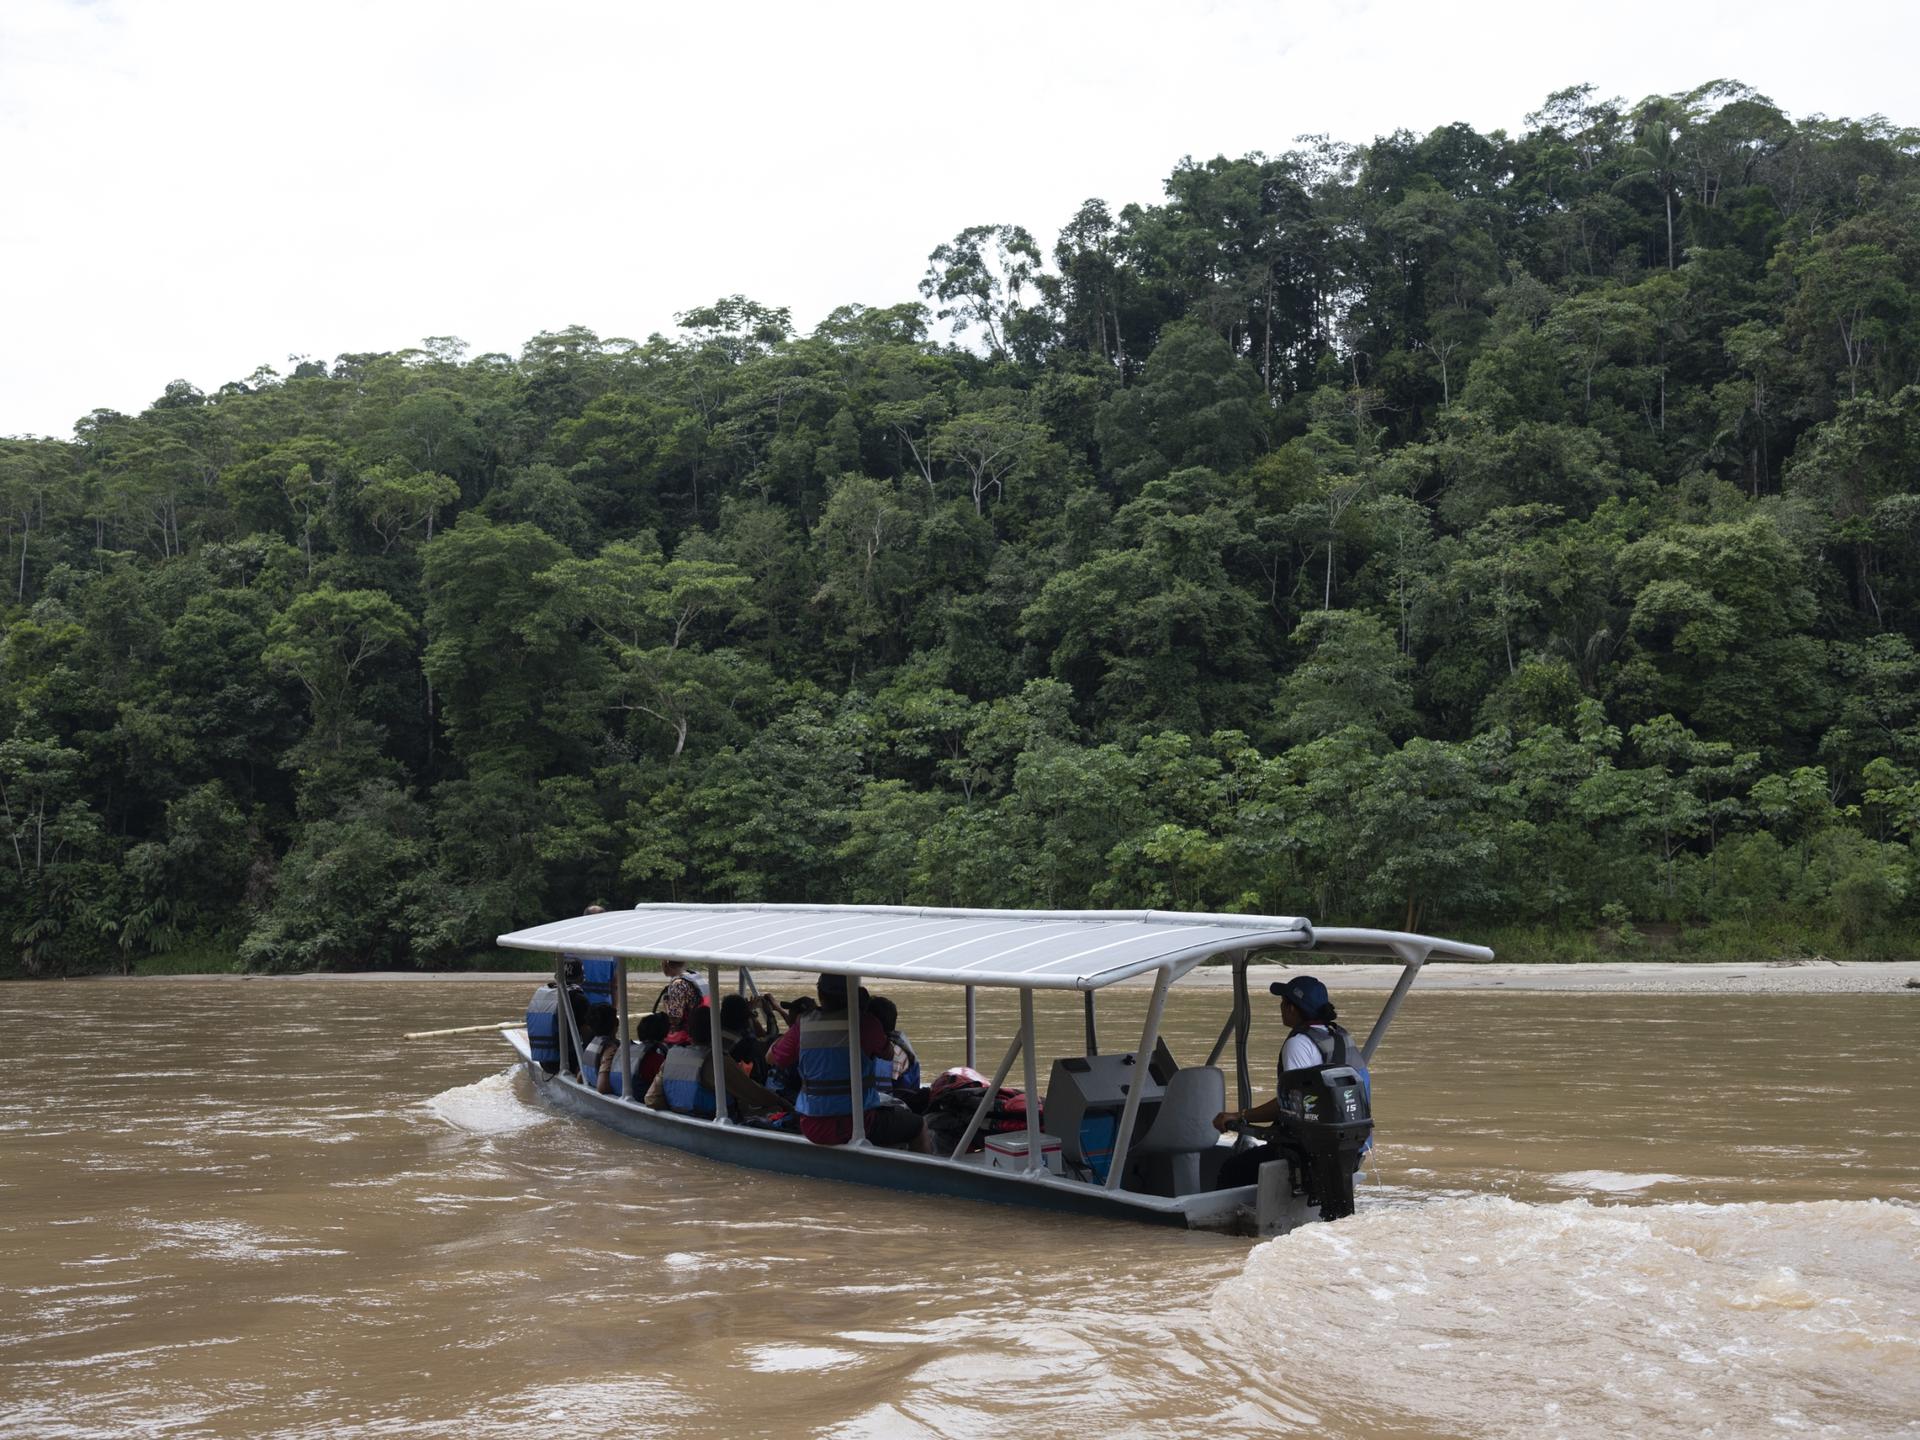 The Kanua floating film festival is the first of its kind, bringing film screenings to Indigenous communities along riverbanks in Ecuador's Amazon region.